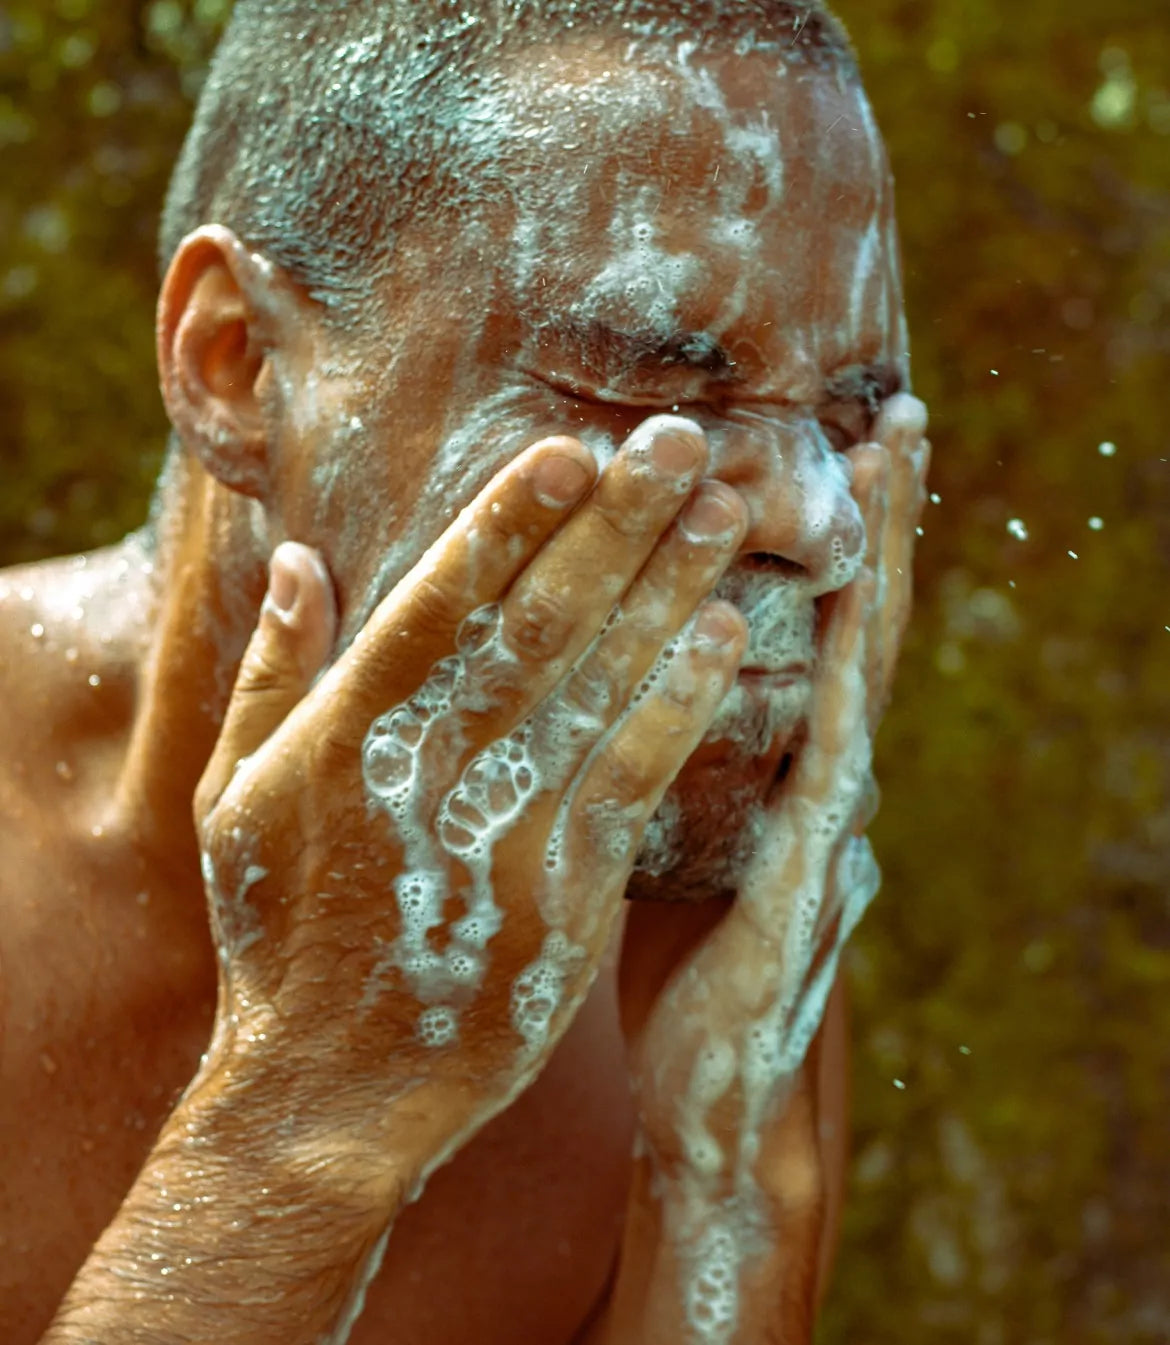 A man using hemp body wash on his face and hands